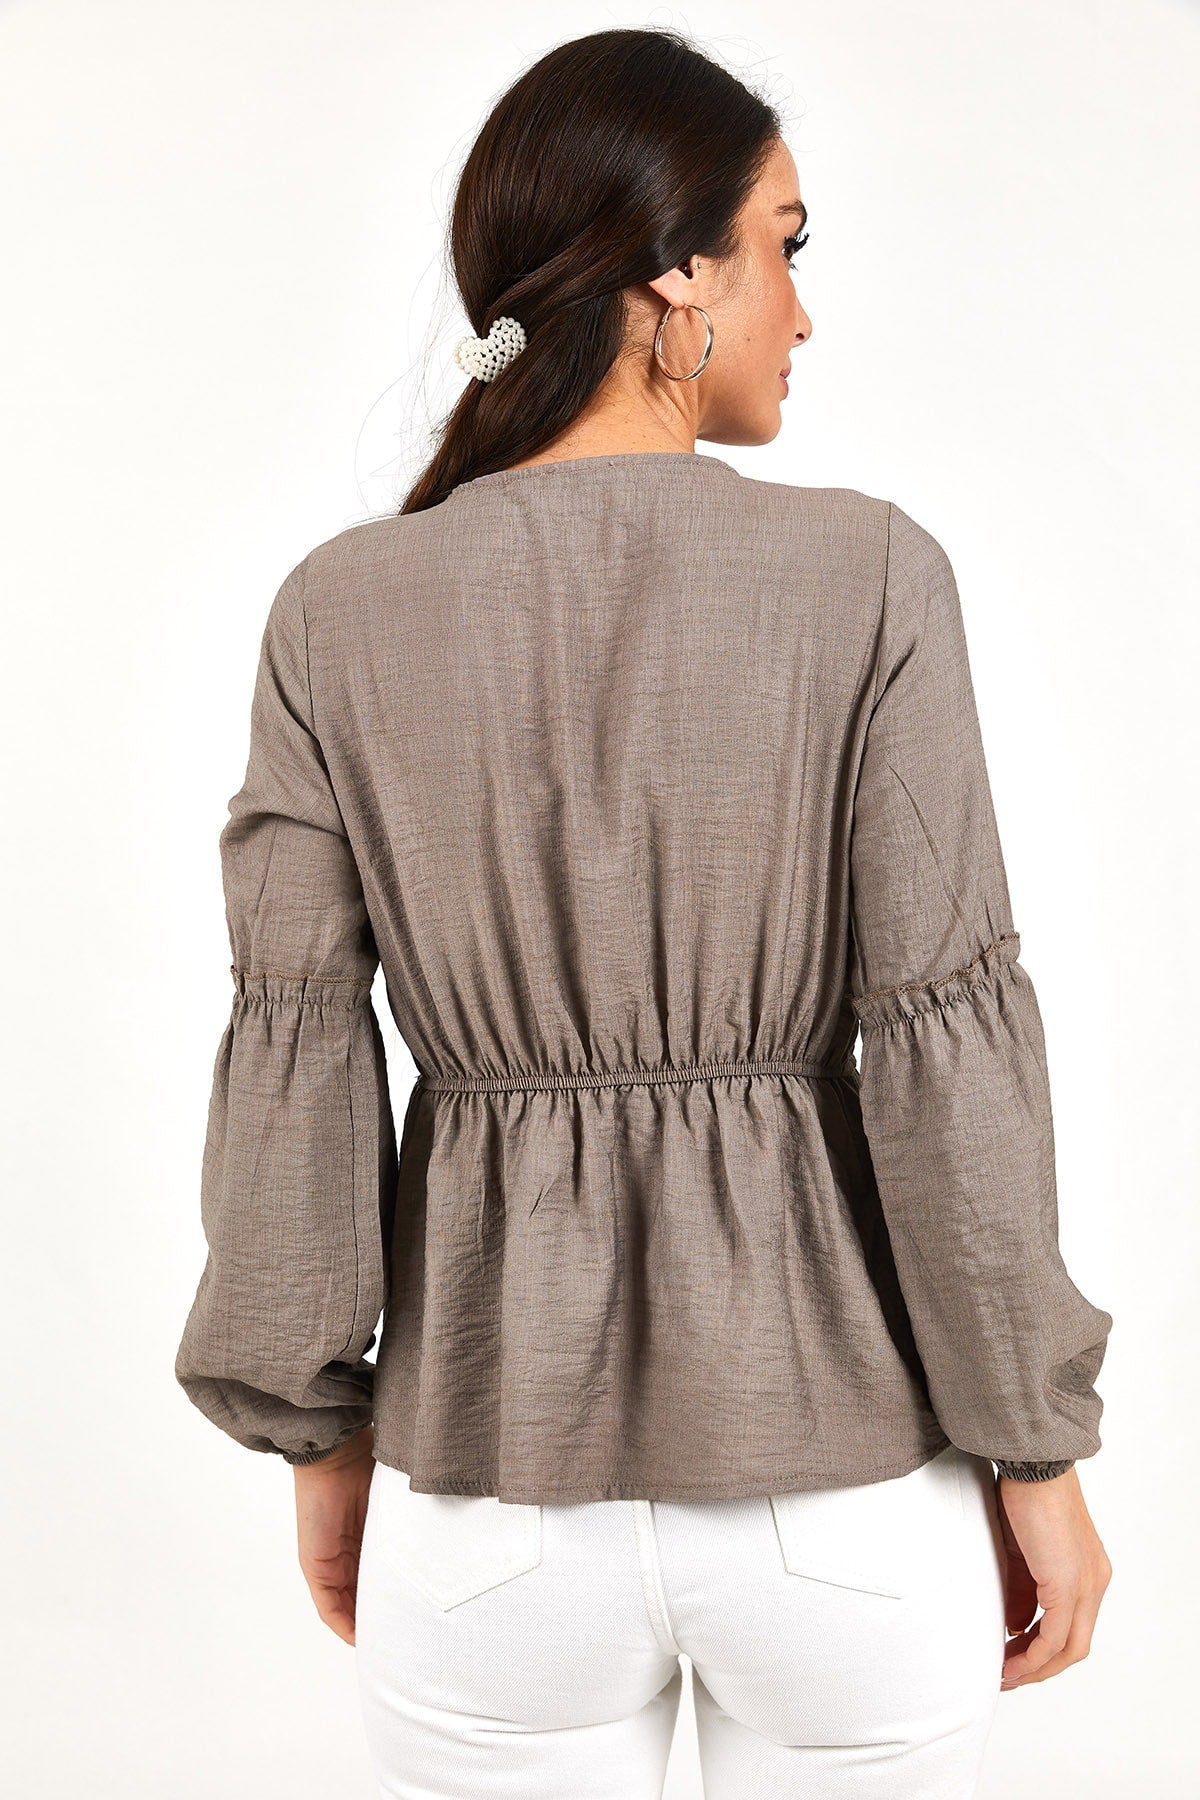 Women's Gray arm and waist tire cruve blouse ARM-21K001149